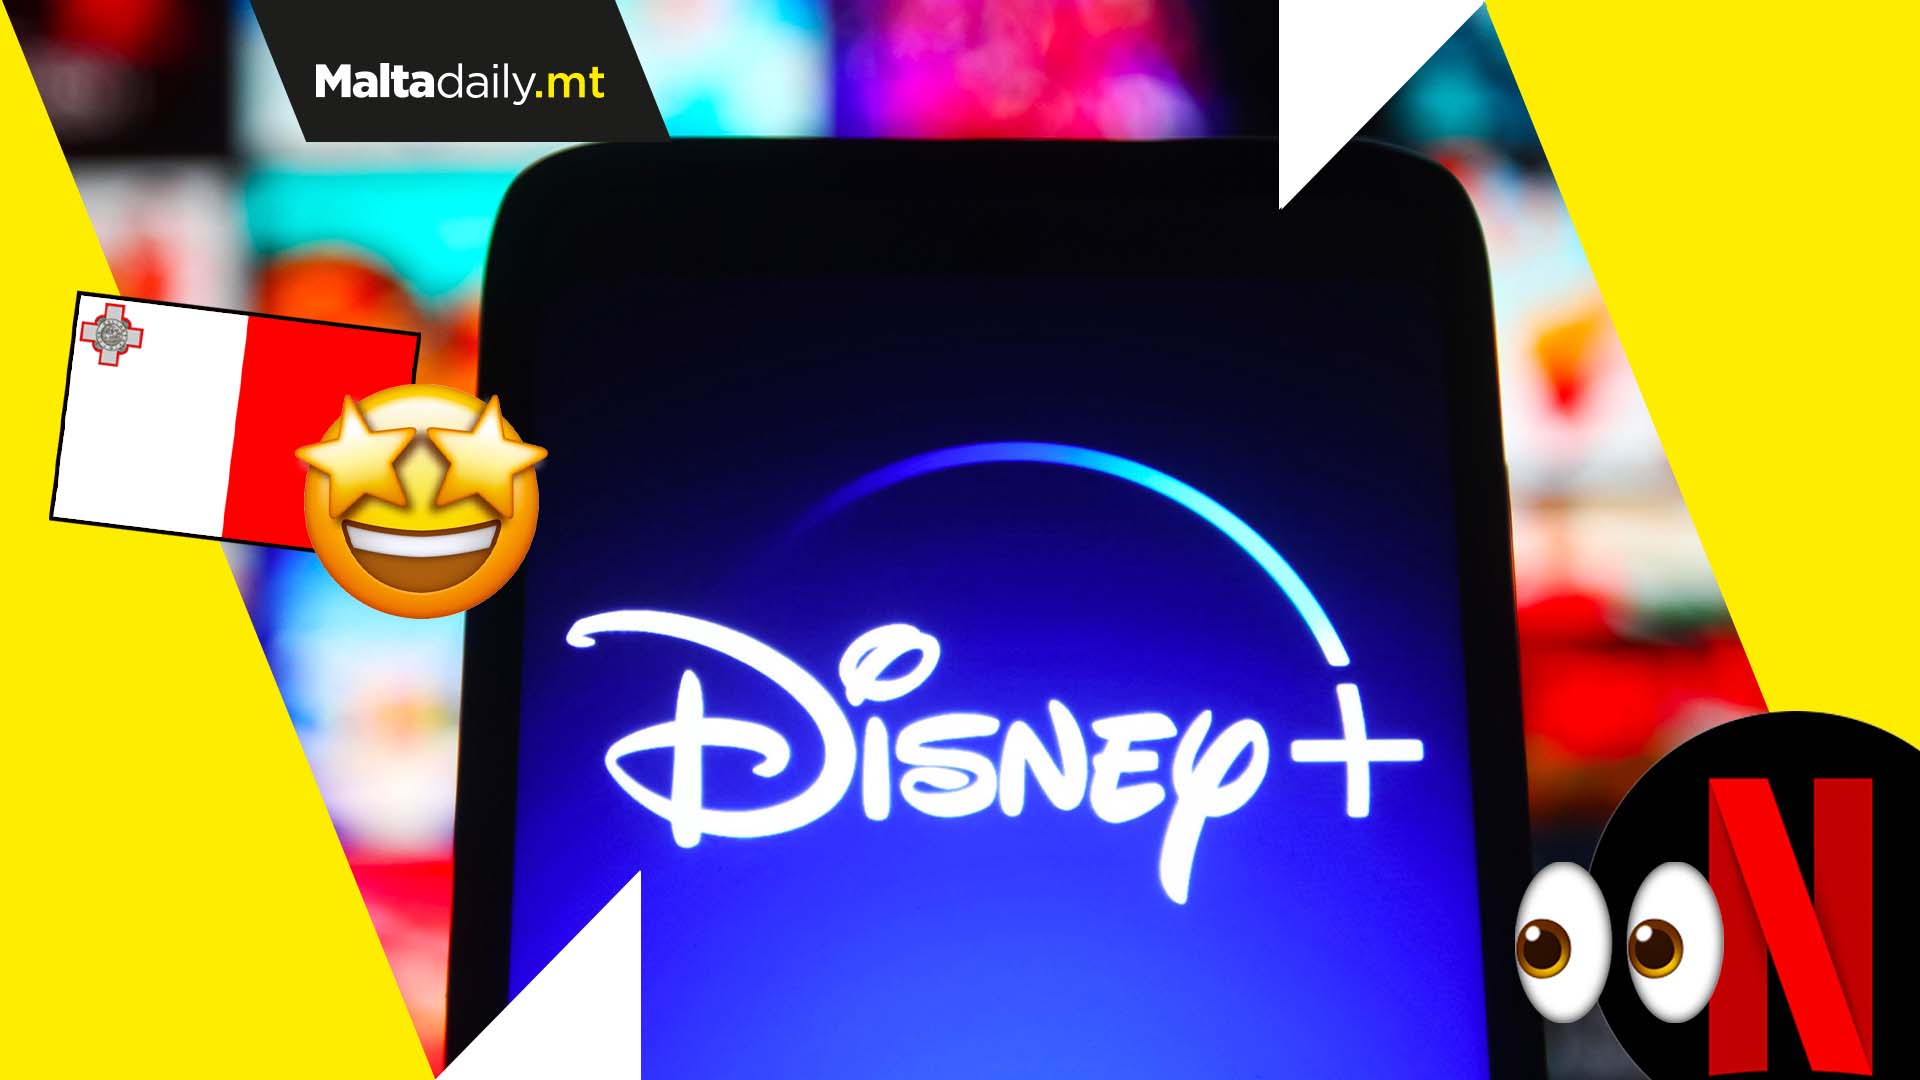 Disney+ streaming service confirmed for Malta this summer